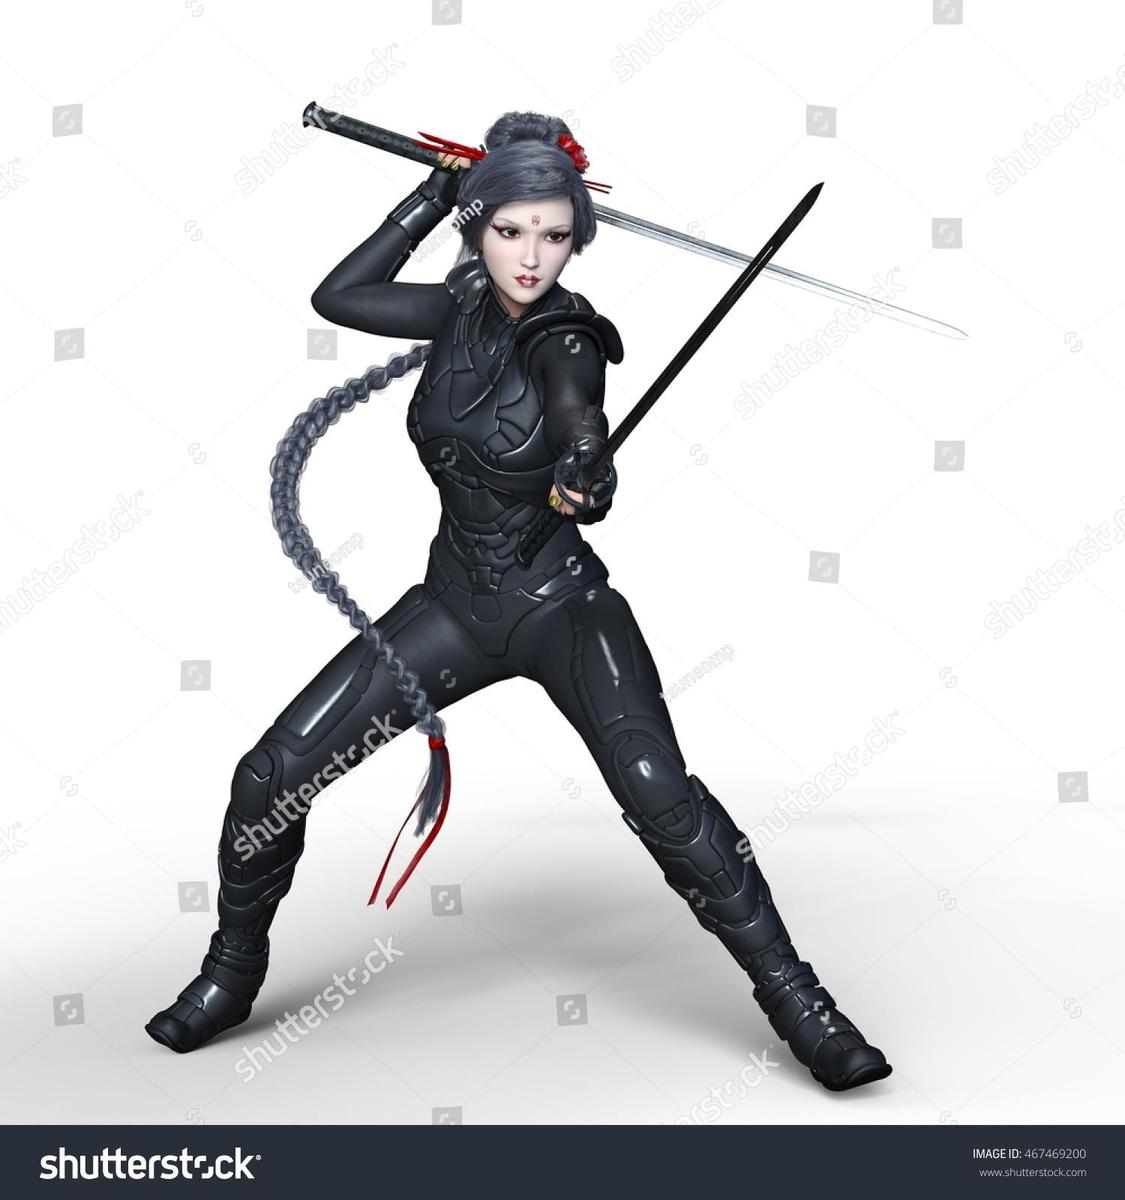 stock-photo--d-cg-rendering-of-a-female-